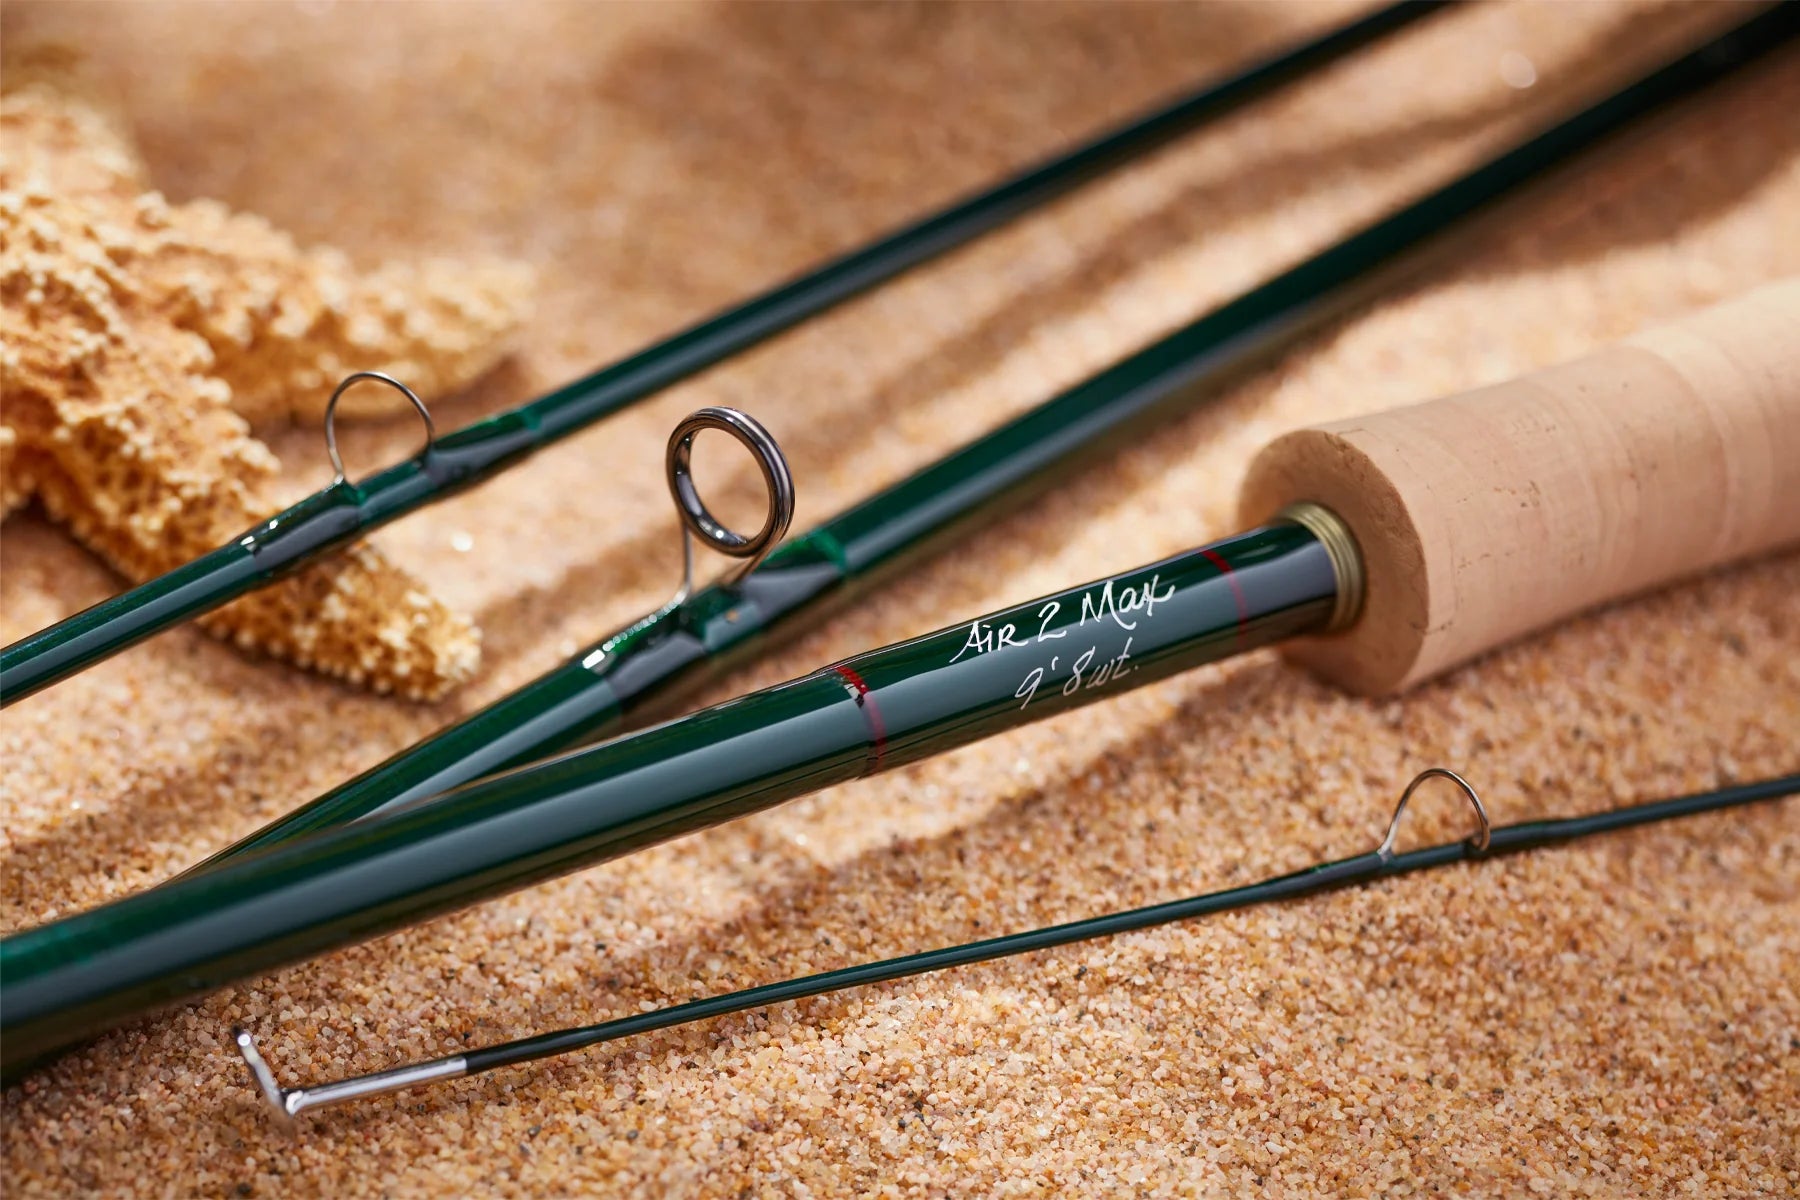 Winston Alpha Plus Review - The Most Powerful Fly Rod